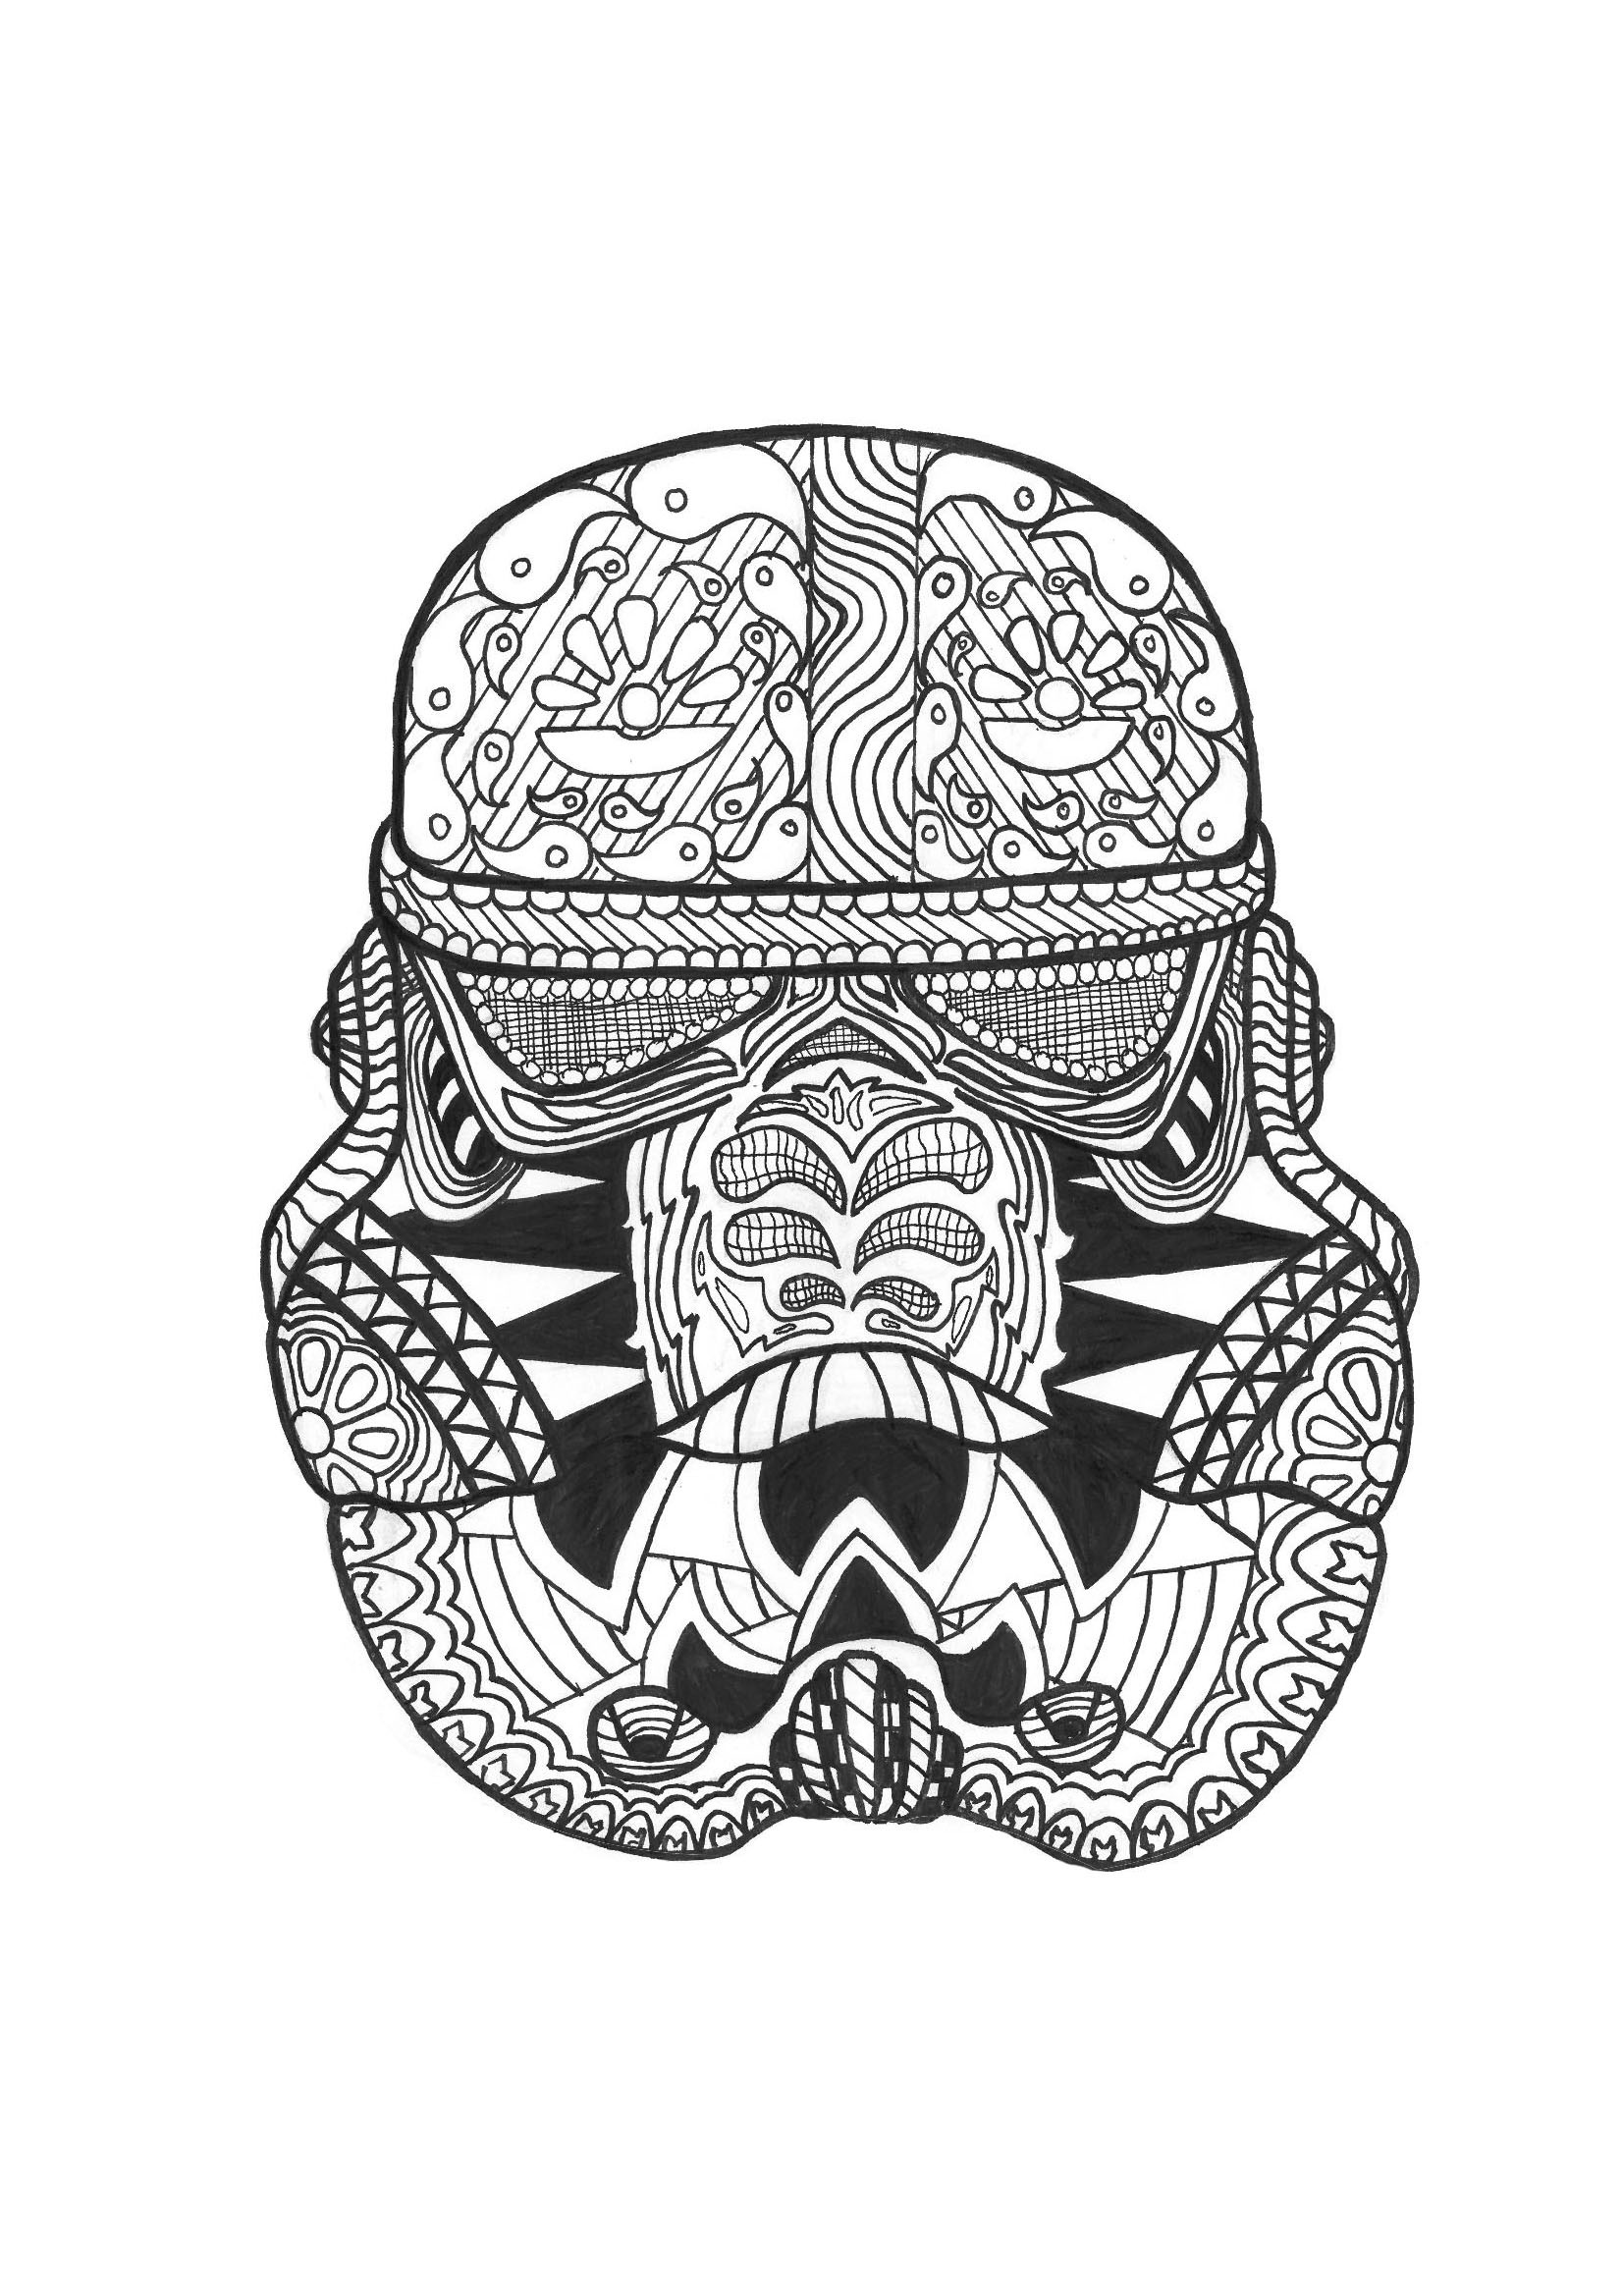 Coloring Pages For Adults Boys
 Zen stormtrooper Anti stress Adult Coloring Pages